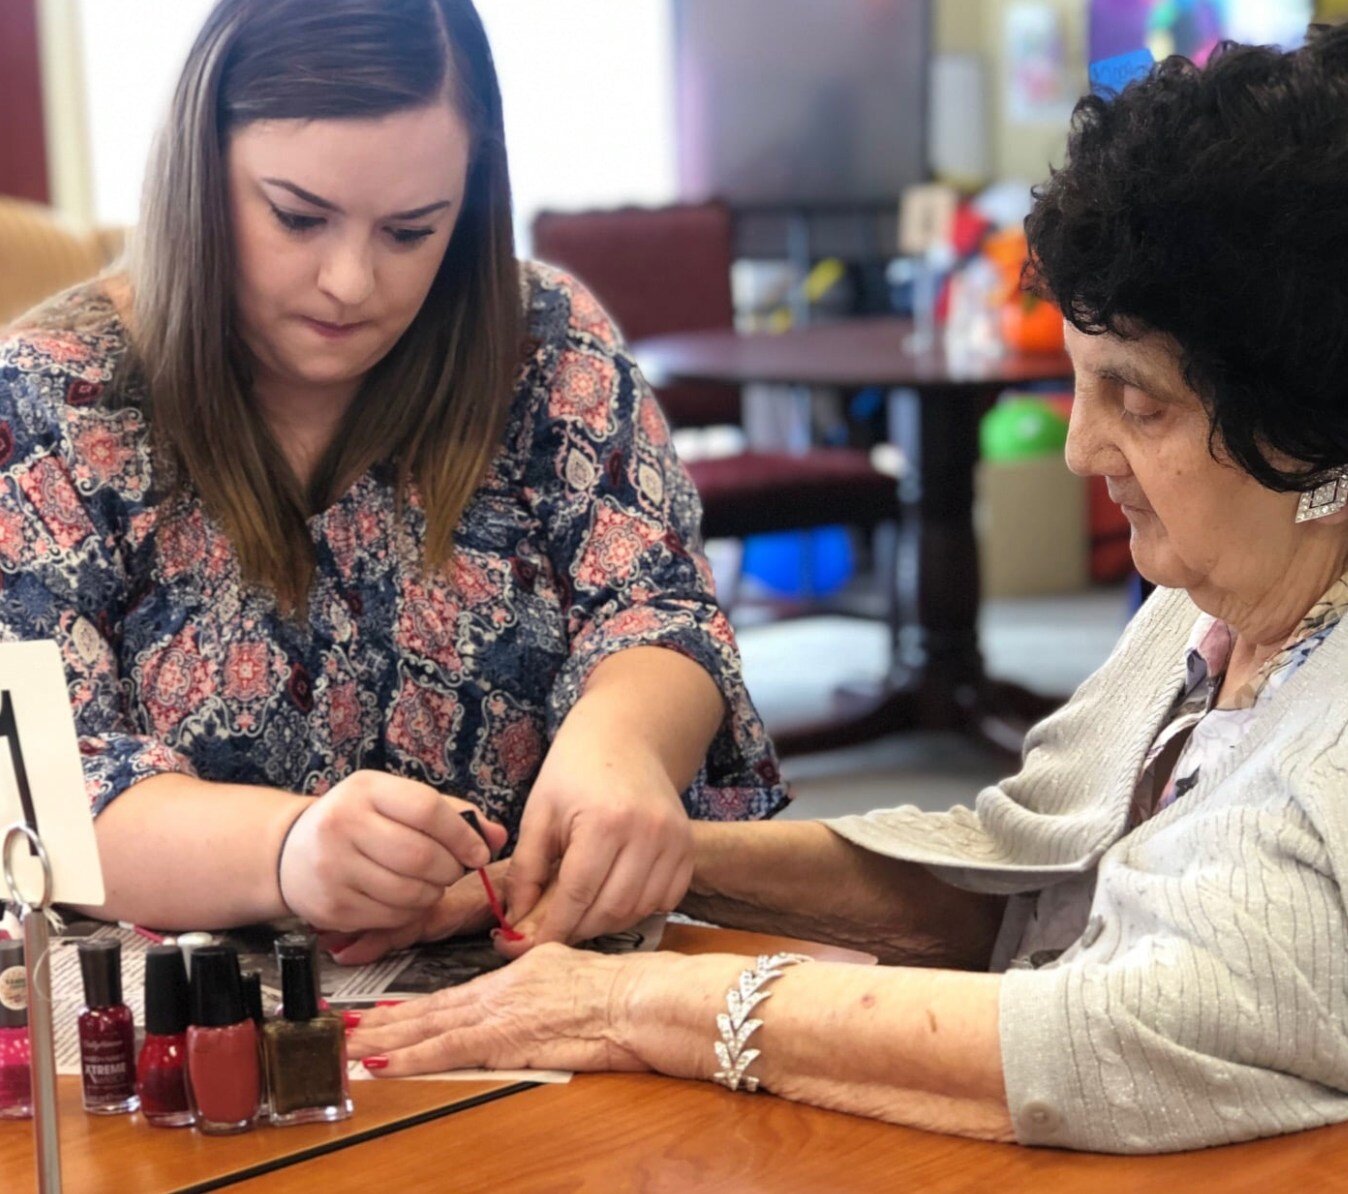 Throwback Thursday to some nail painting! Our Silver Fox members are always look dazzling!